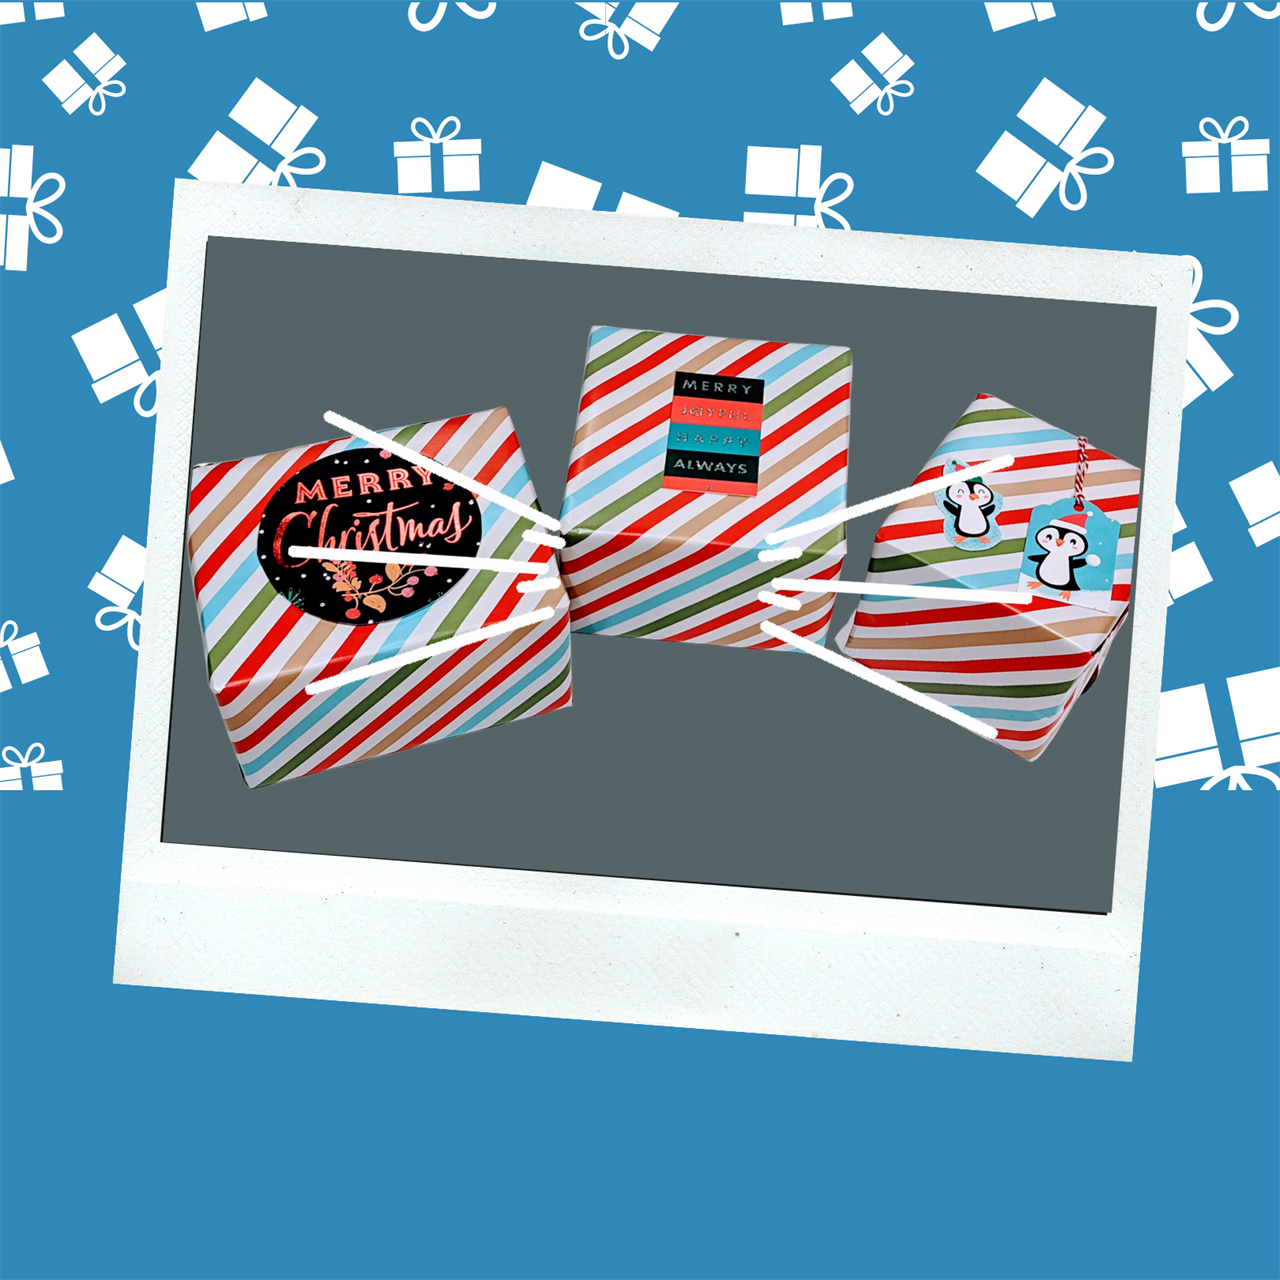 packages wrapped in striped paper with gift tags